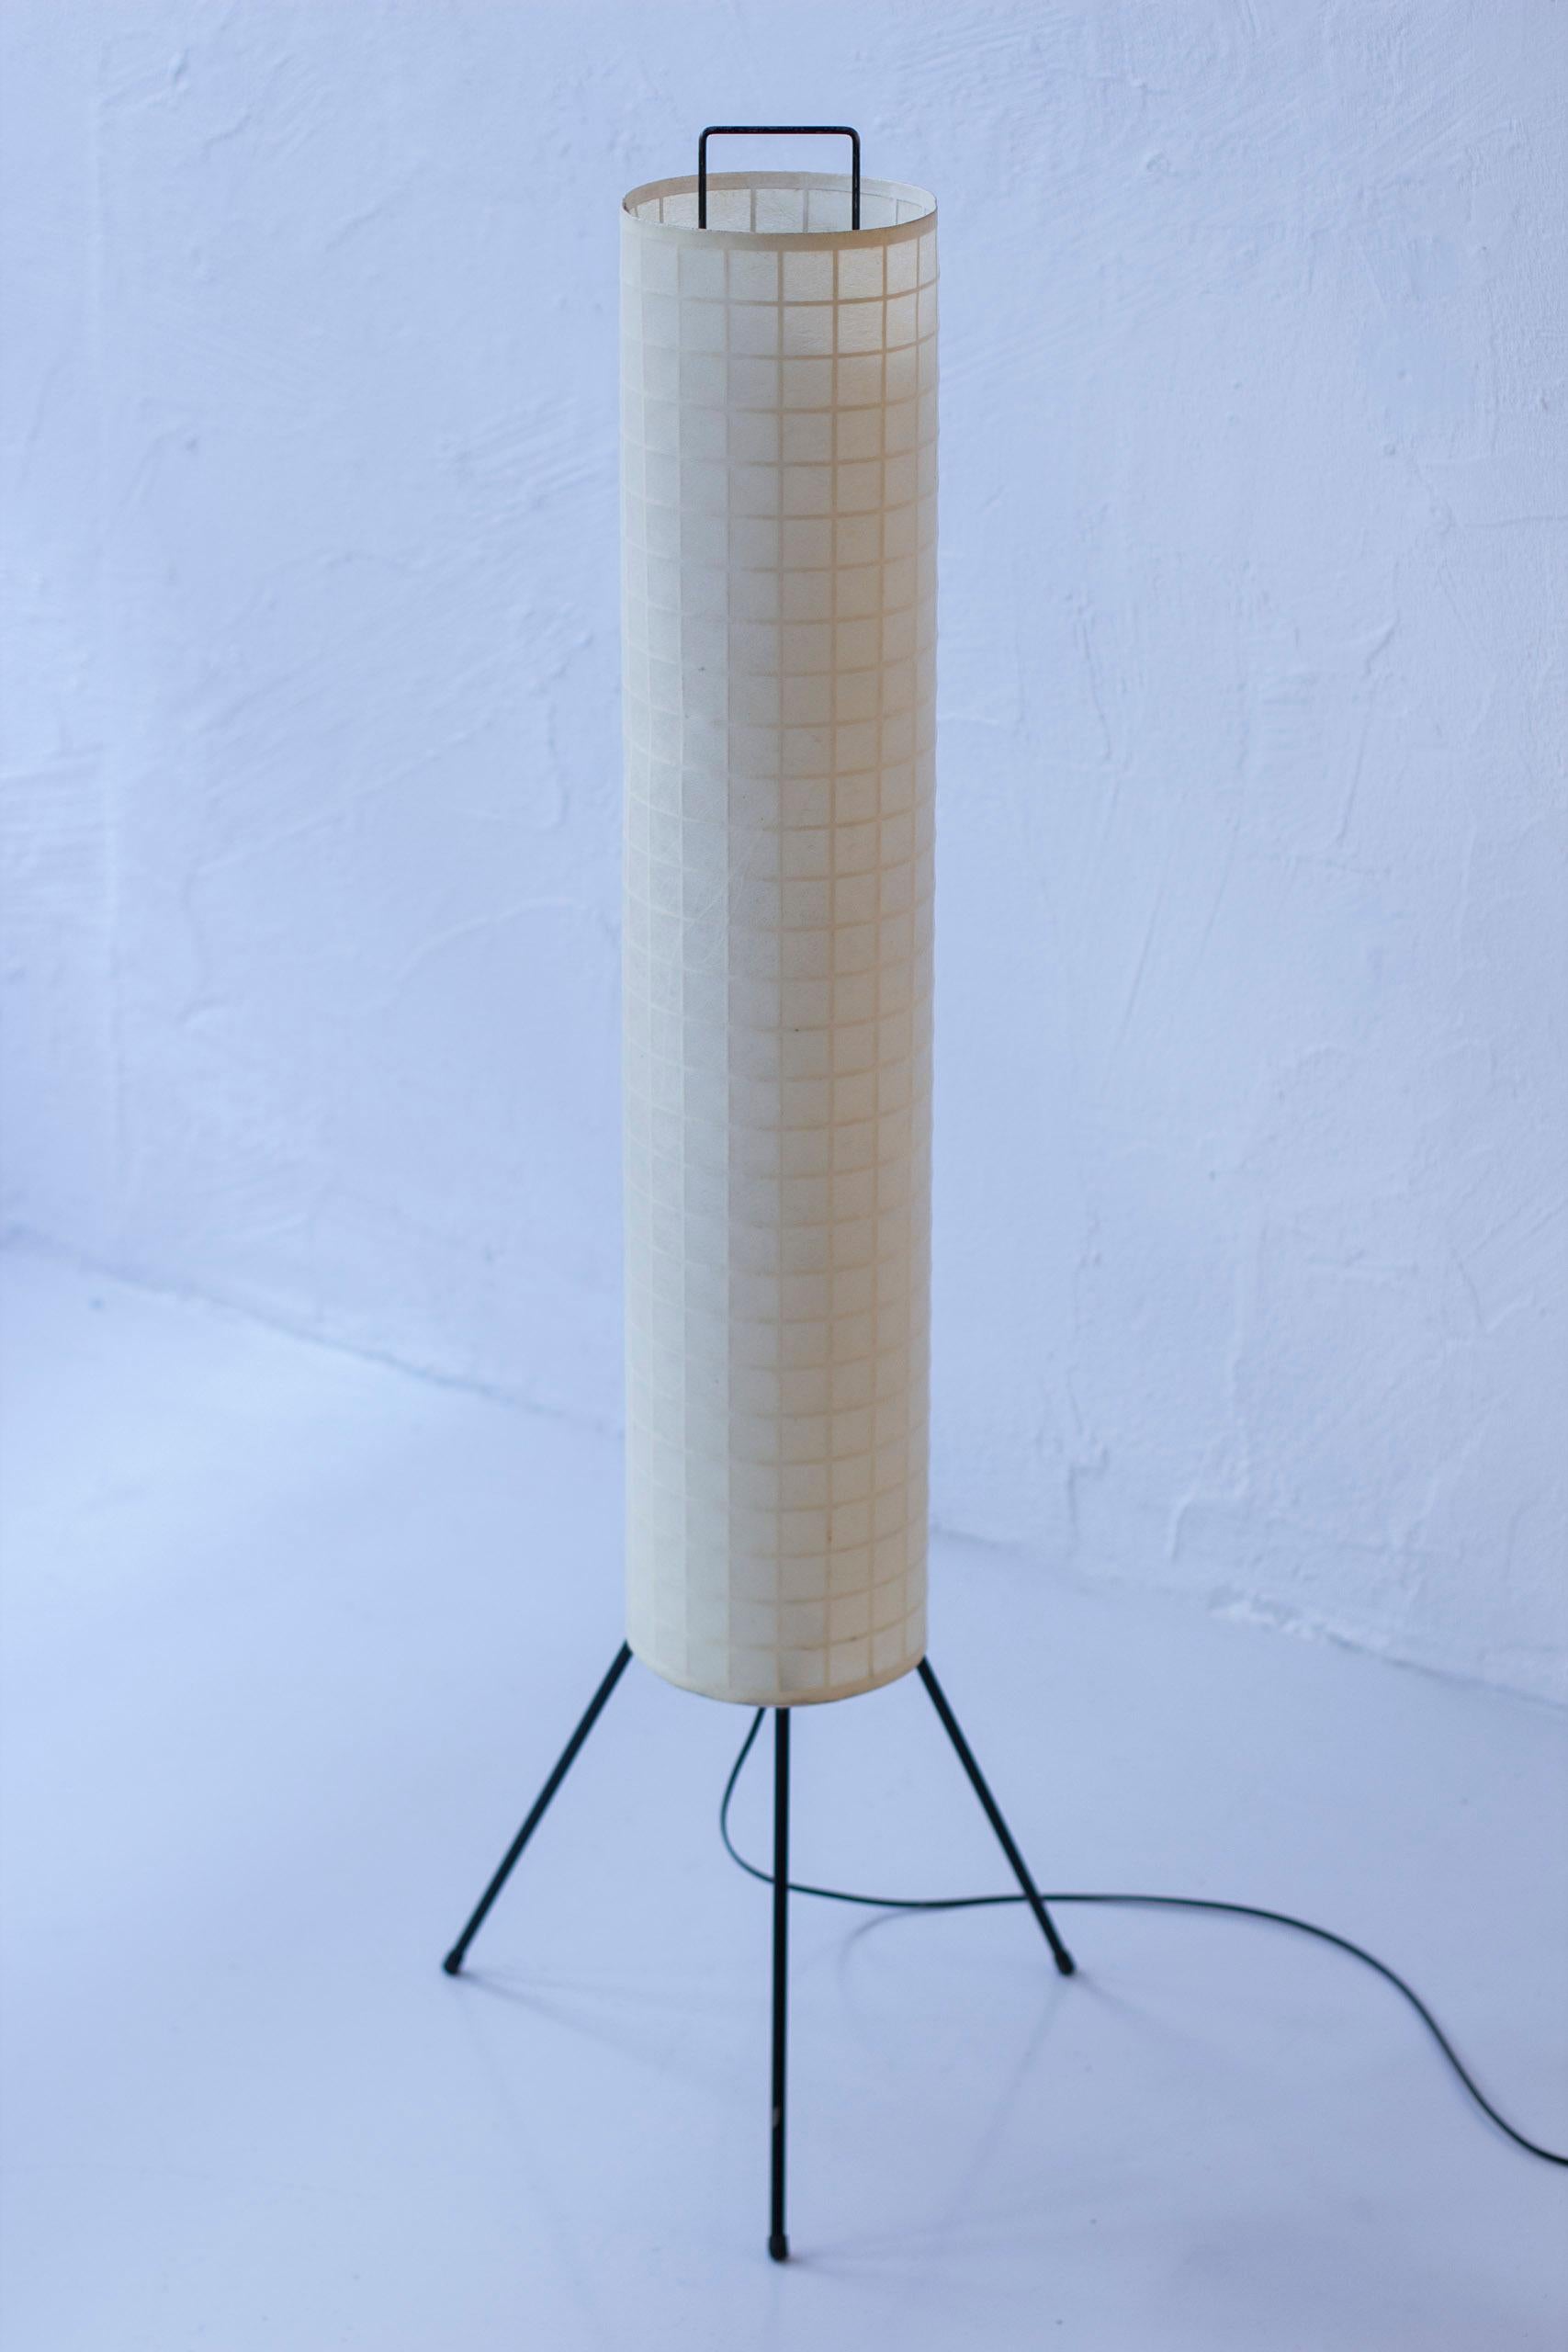 Danish modern floor lamp designed and produced in Denmark. Made sometime during the 1950s. Black lacquered tripod base with a long graphic metal frame covered with cocoon resin weave. Light switch on the chord. Good vintage condition with light age